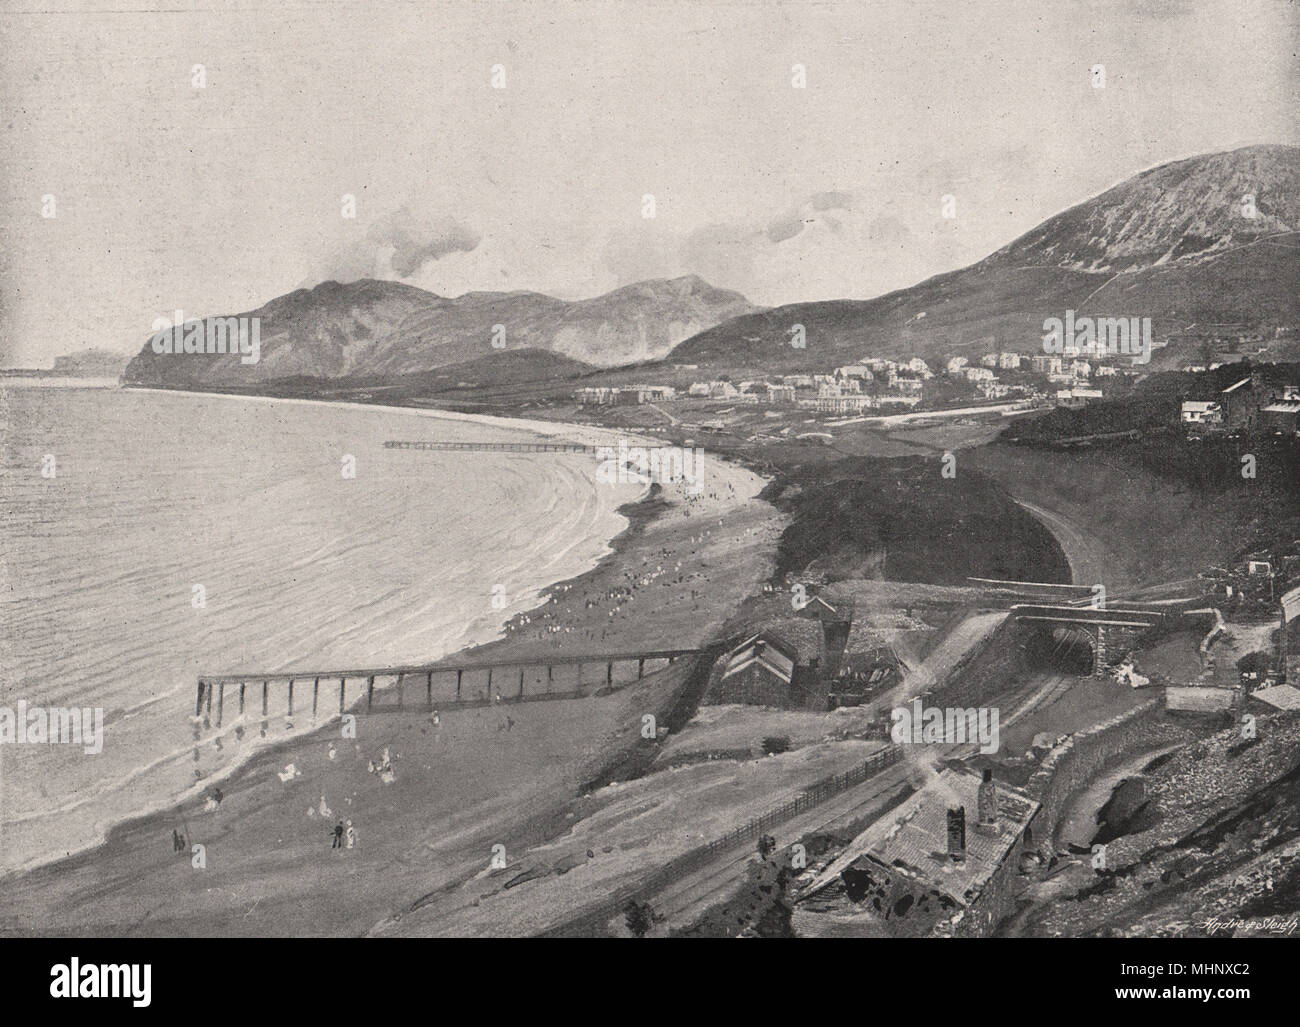 WALES. Penmaenmawr 1900 old antique vintage print picture Stock Photo